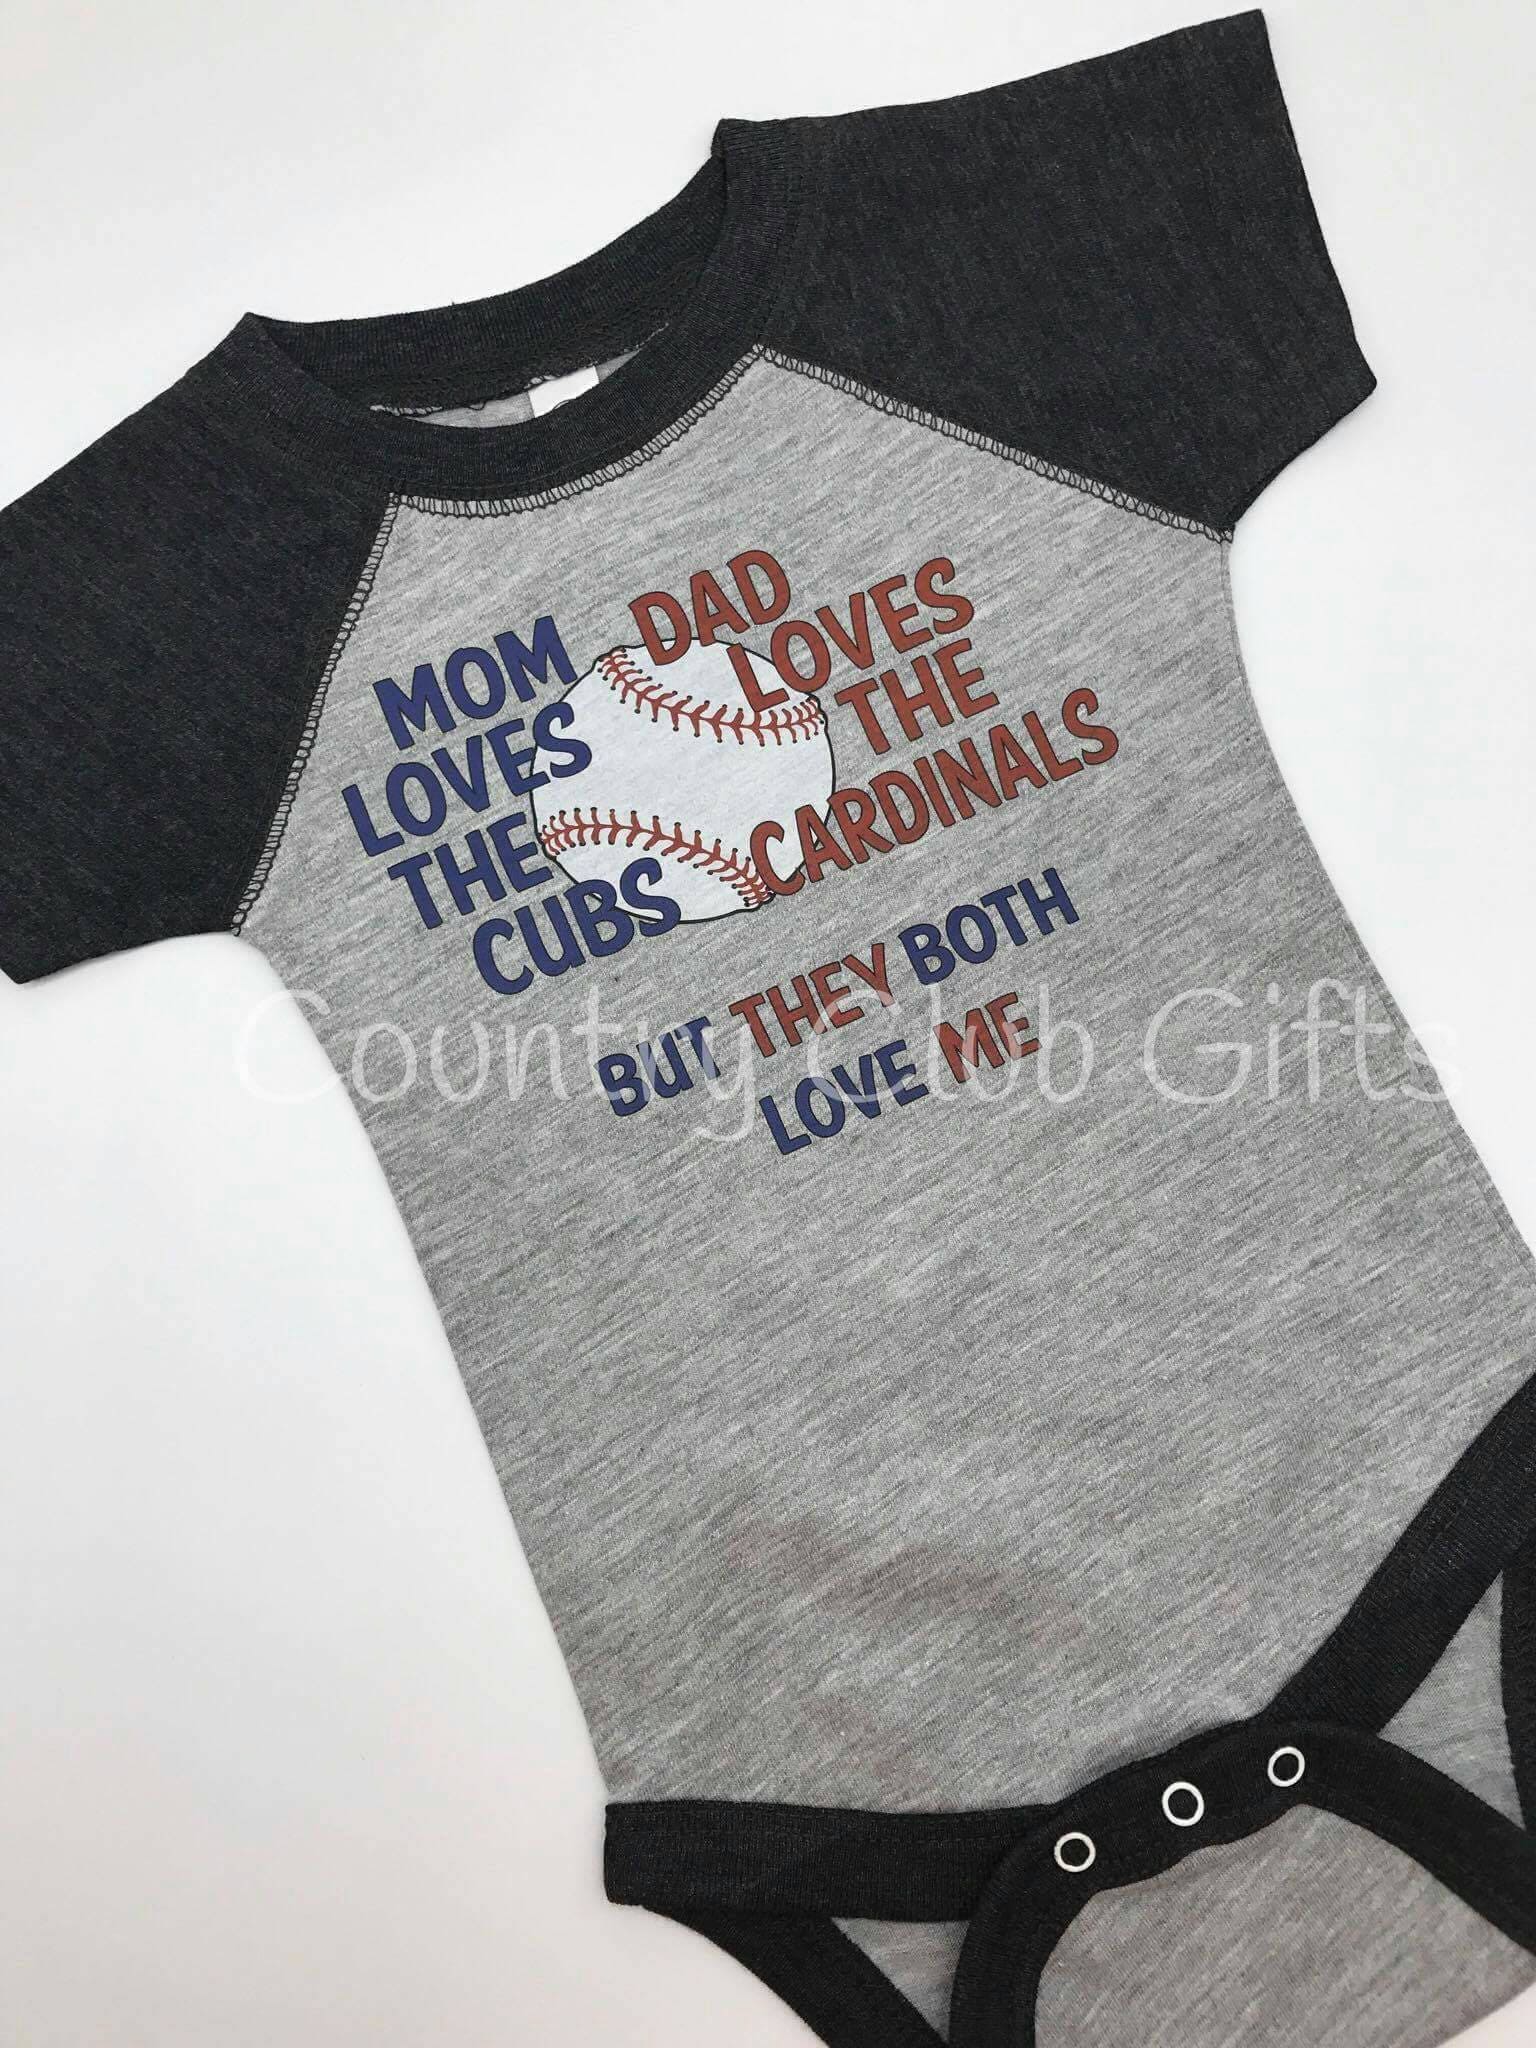 House Divided Shirt | Cubs | Cardinals | New Baby Gift | Baseball Outfit | Your Teams | Baby Shower Gift | Sports Rivals | Unusual Baby Gift